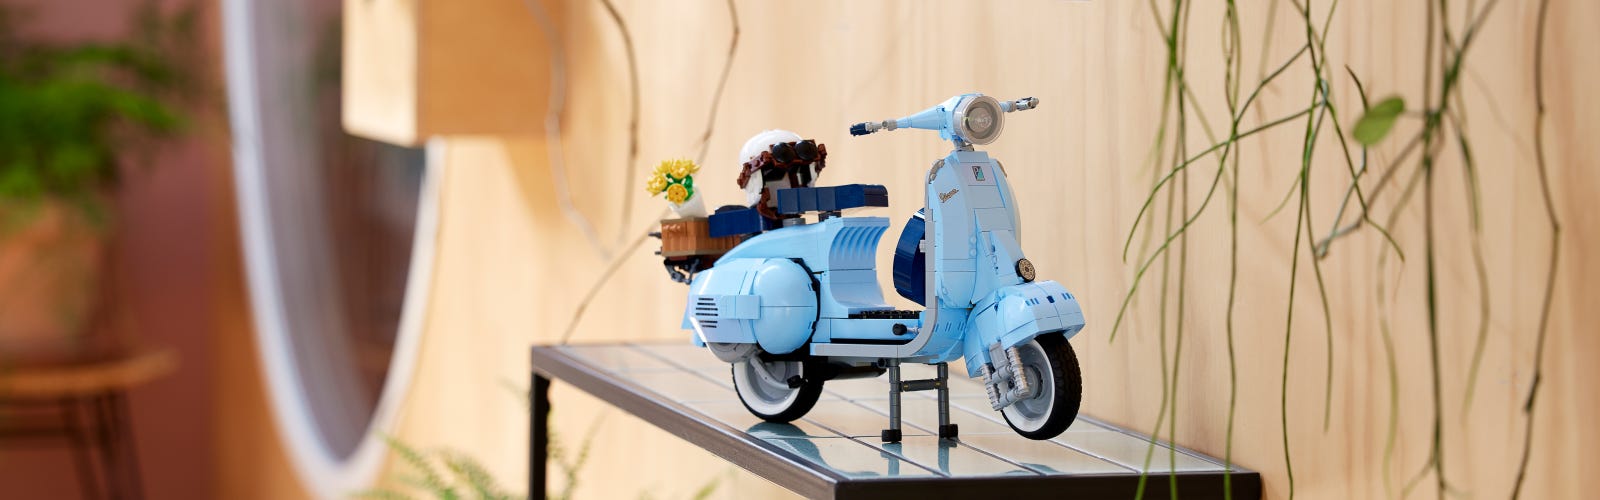 solopgang Udlevering is The history of the iconic Vespa 125 scooter | Official LEGO® Shop US